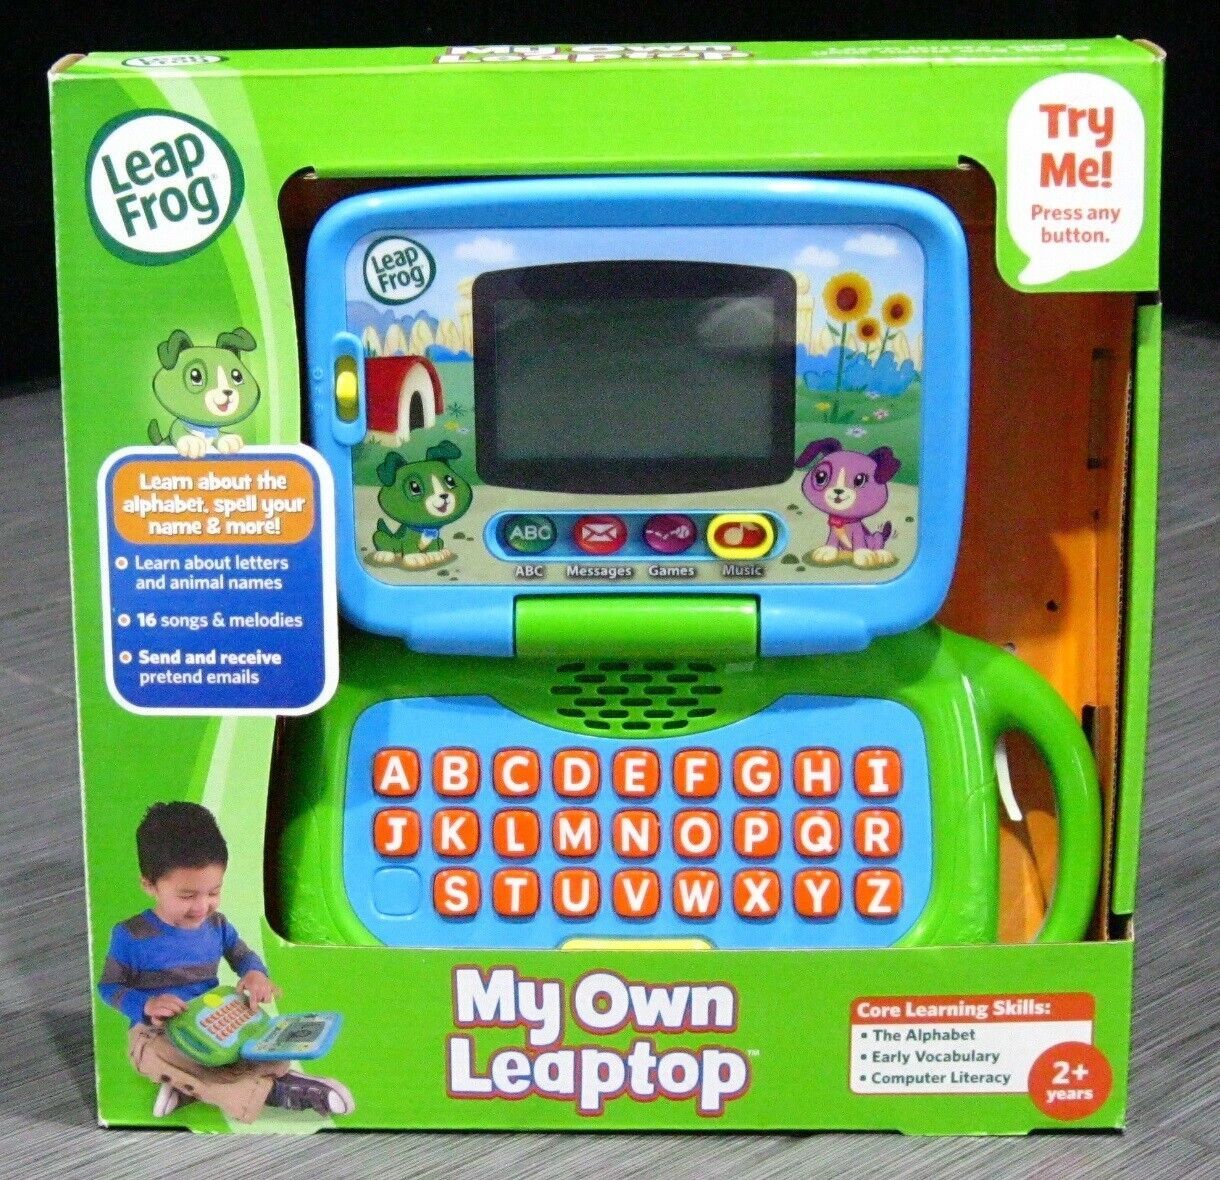 VTECH Pink NITRO NOTEBOOK Child's LAPTOP Computer with Mouse and BOX